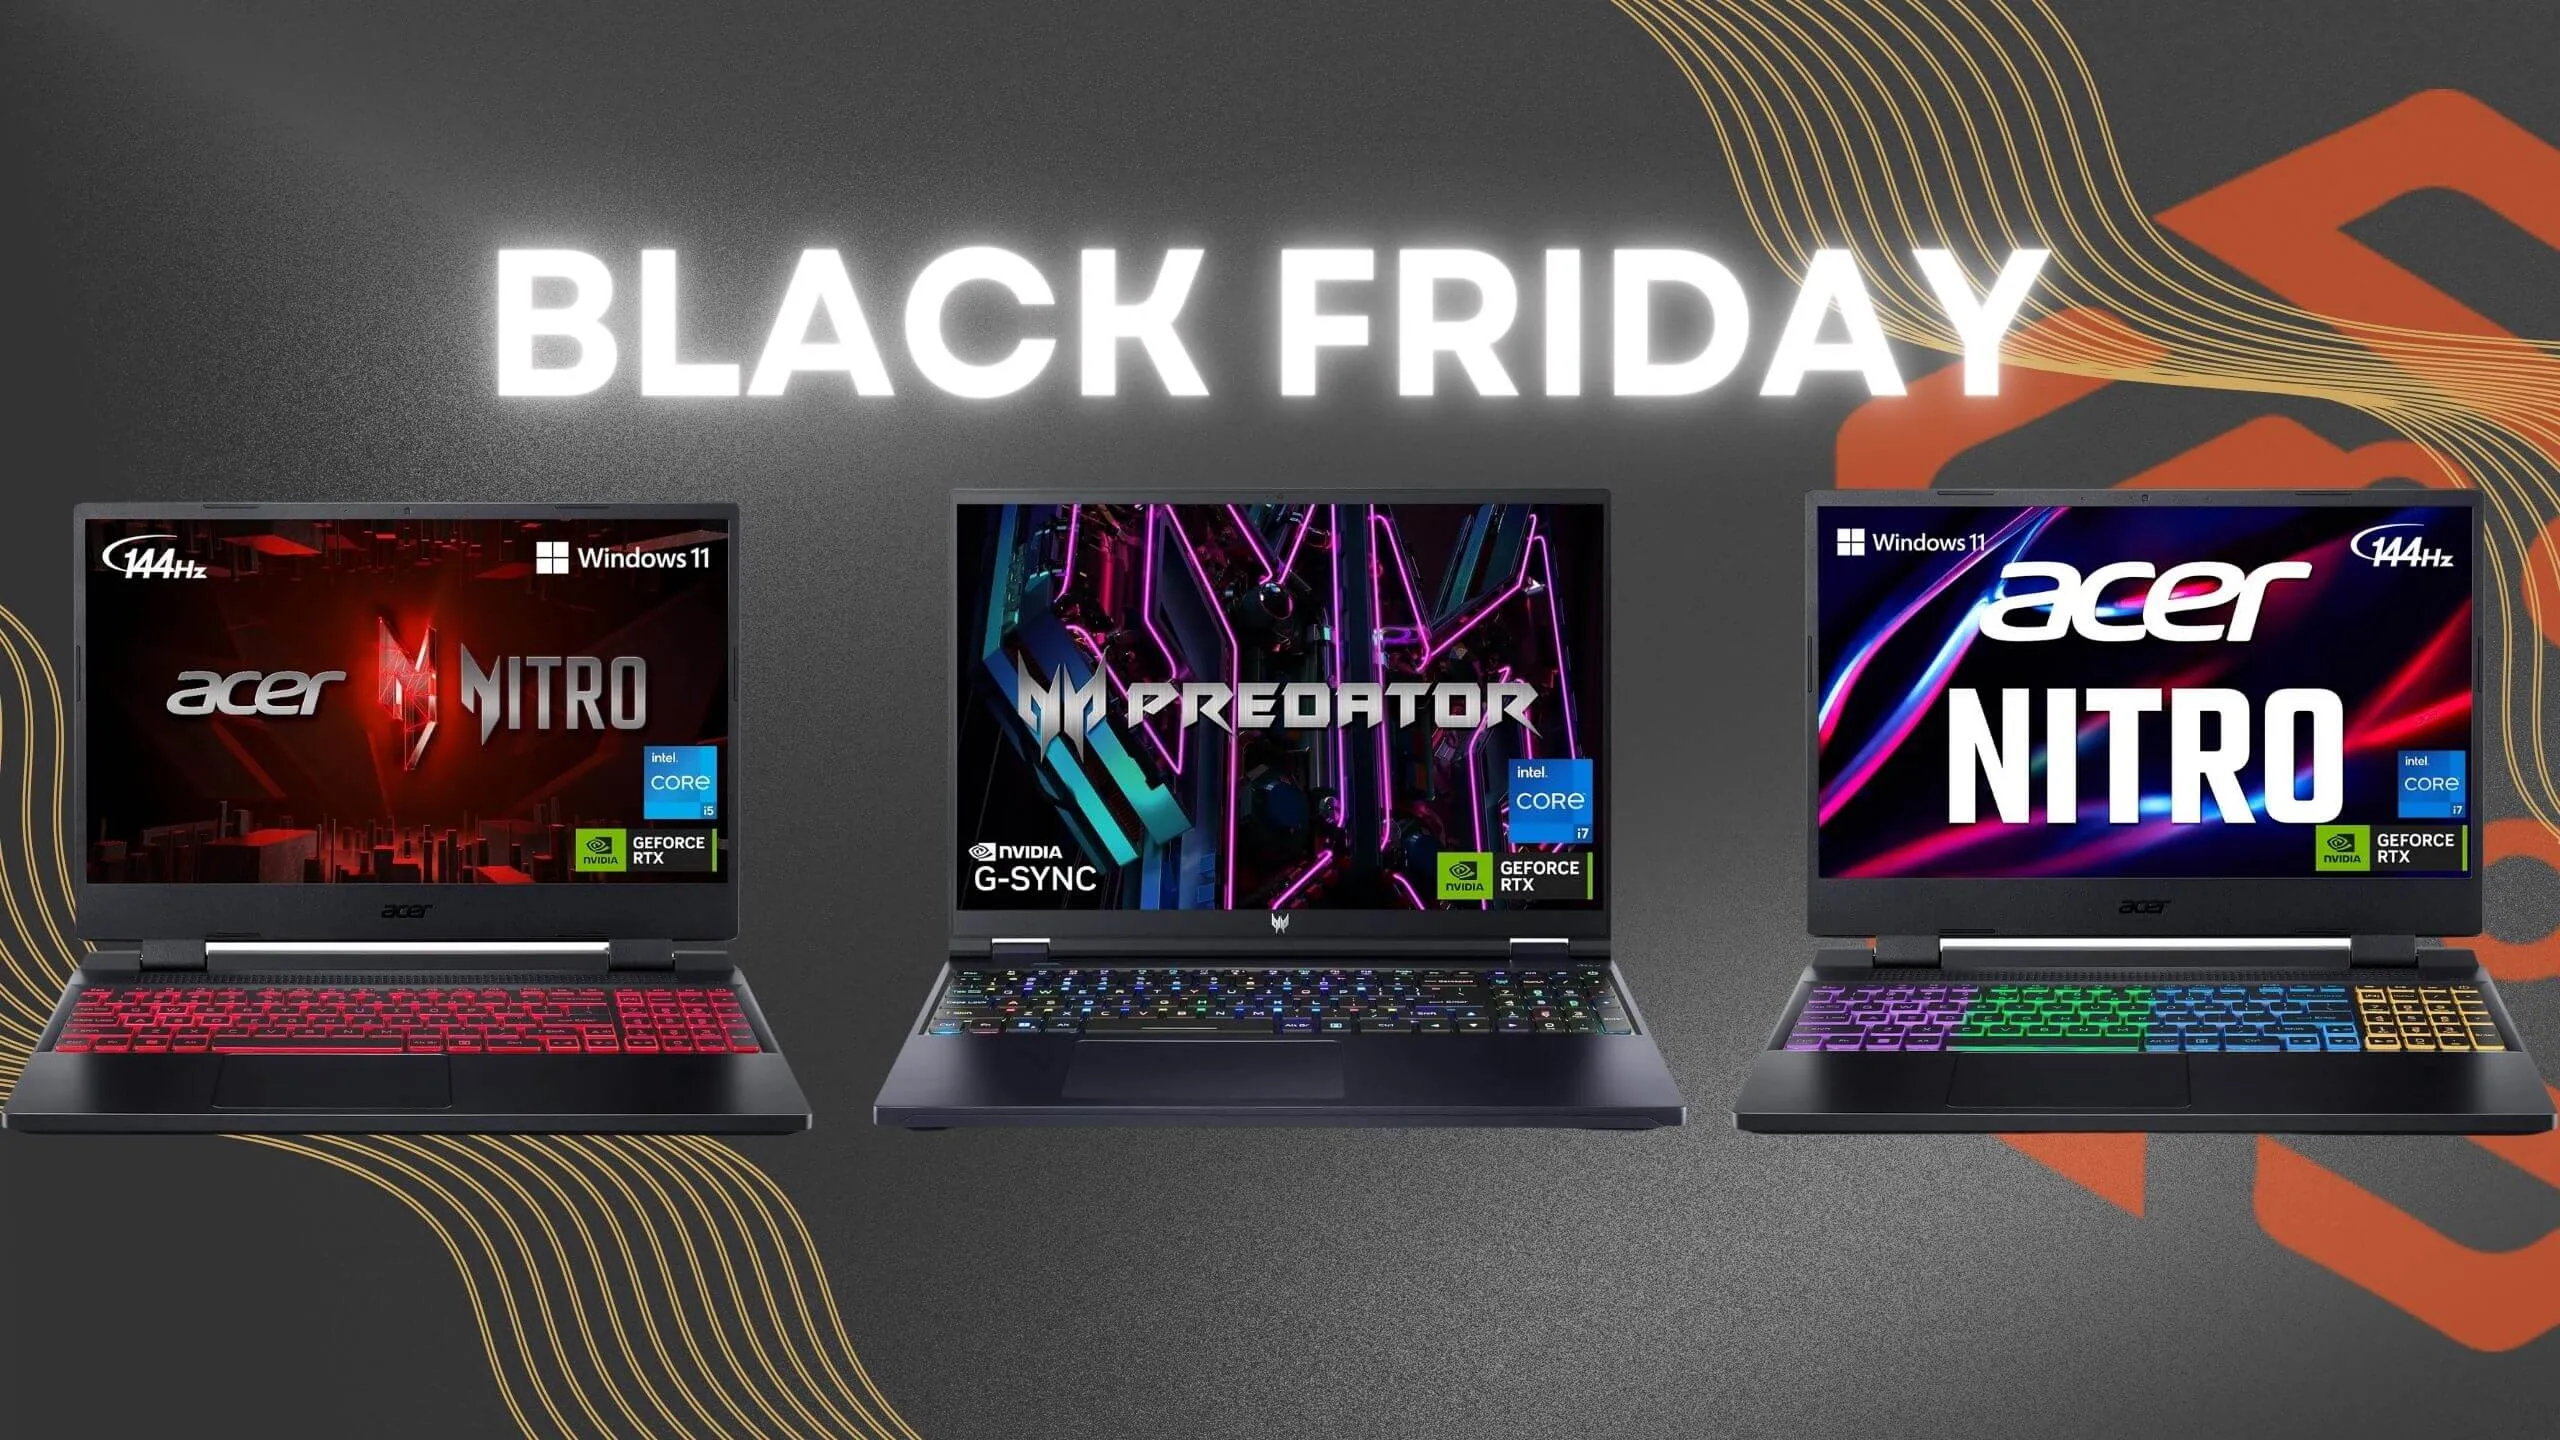 Acer Gaming Laptops with Black Friday Deals